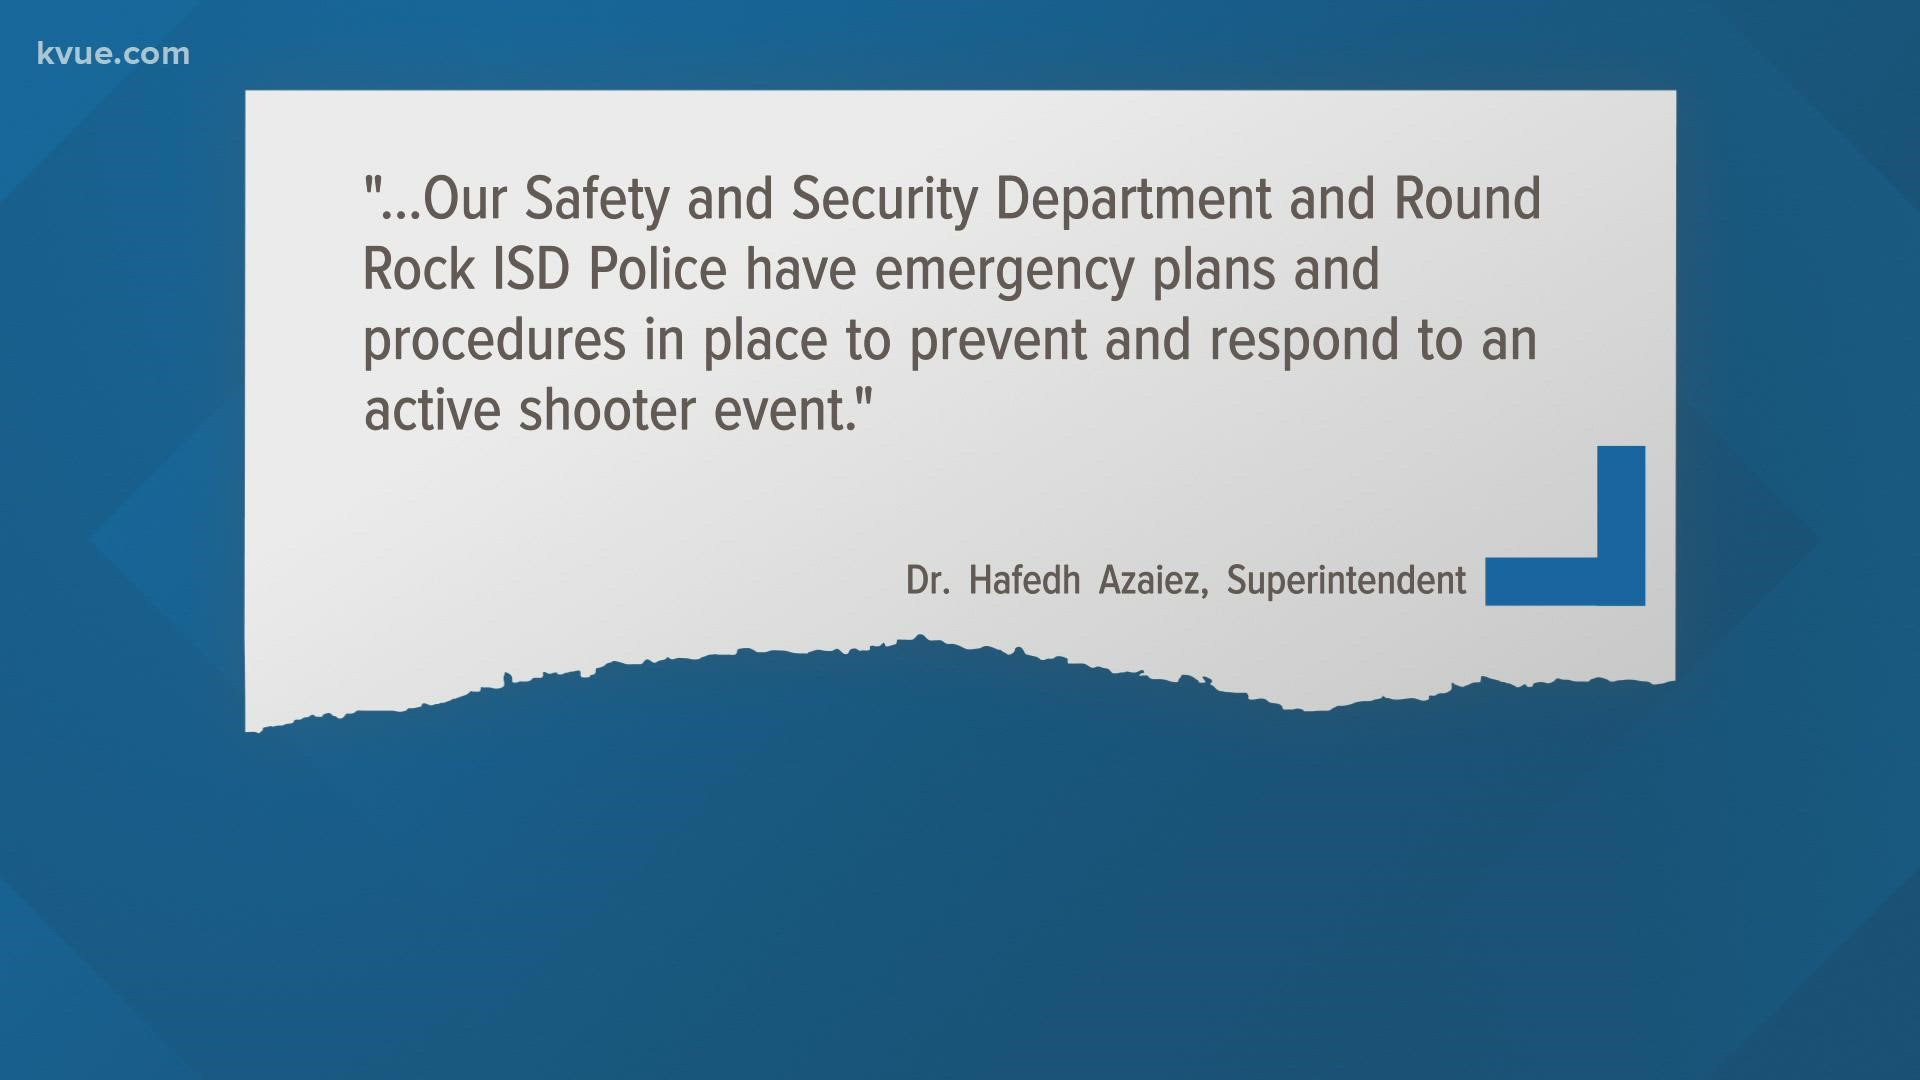 Nineteen children were killed at an elementary school in Uvalde on Tuesday. Round Rock ISD's superintendent sent a letter to parents addressing what happened.